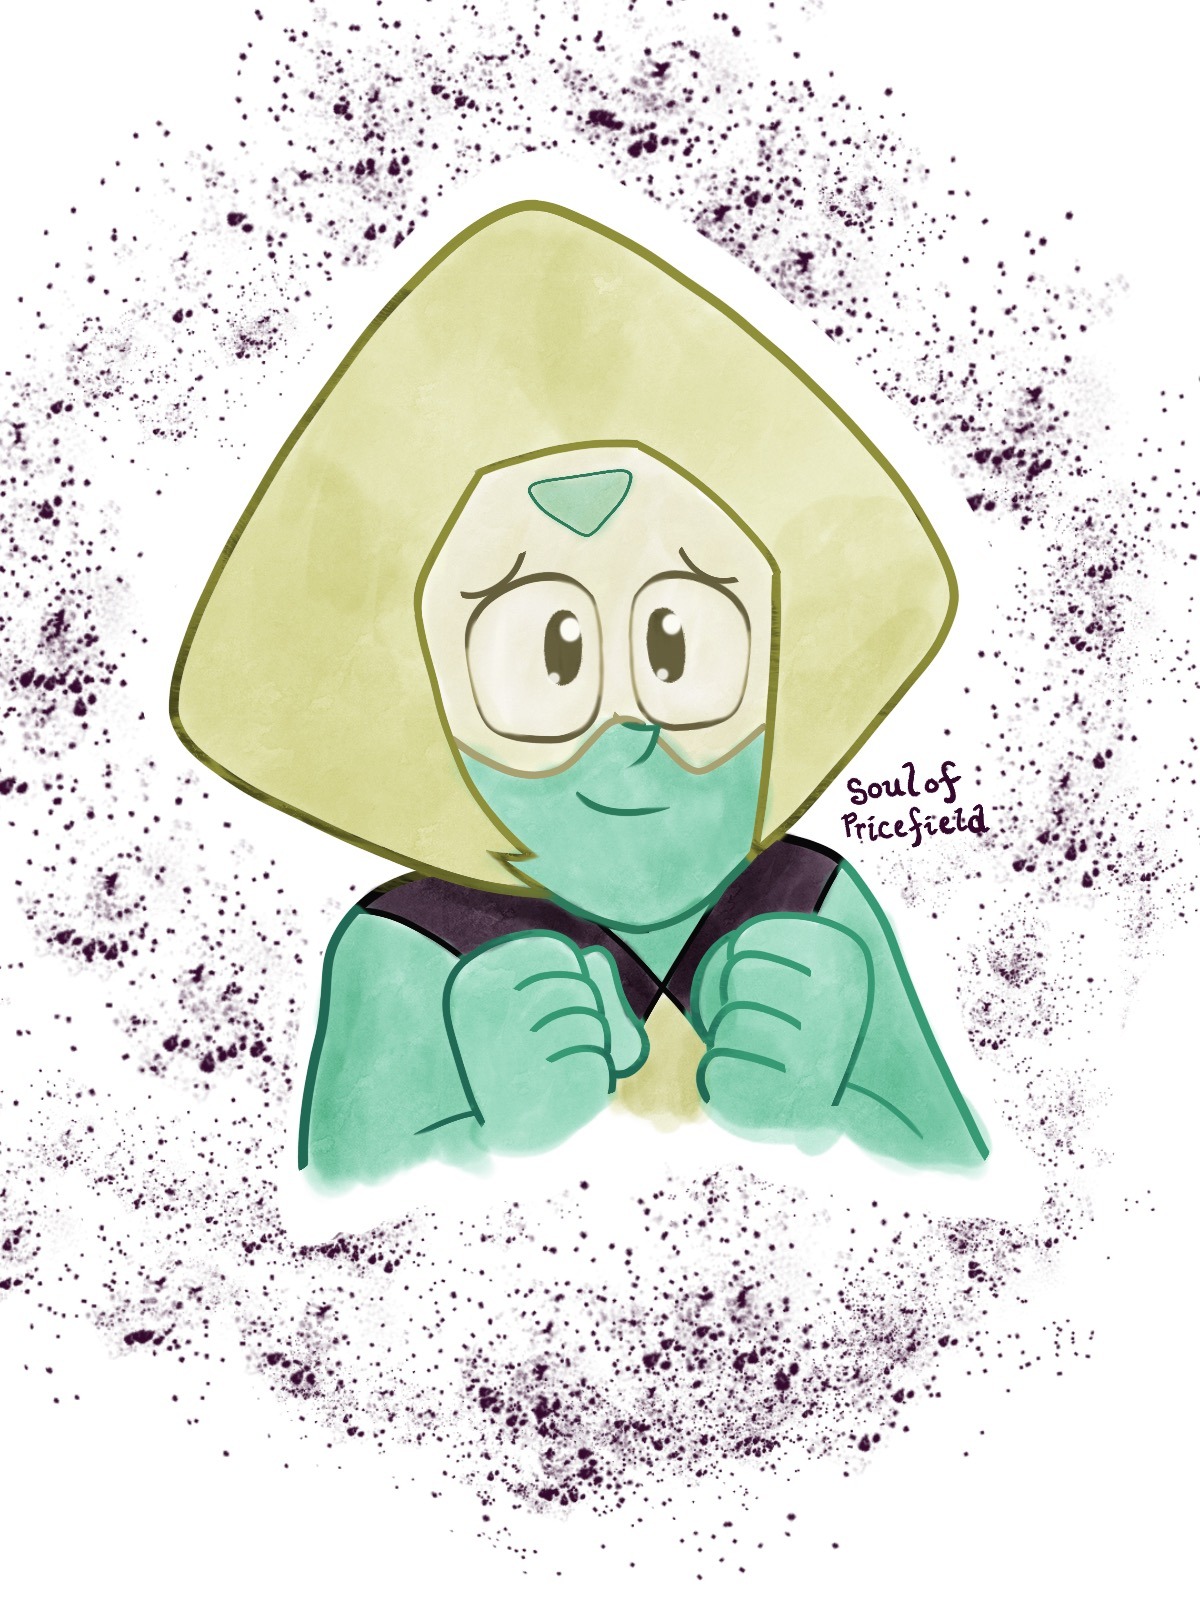 Haven’t drawn in forever so heres warm up redraw of peridot